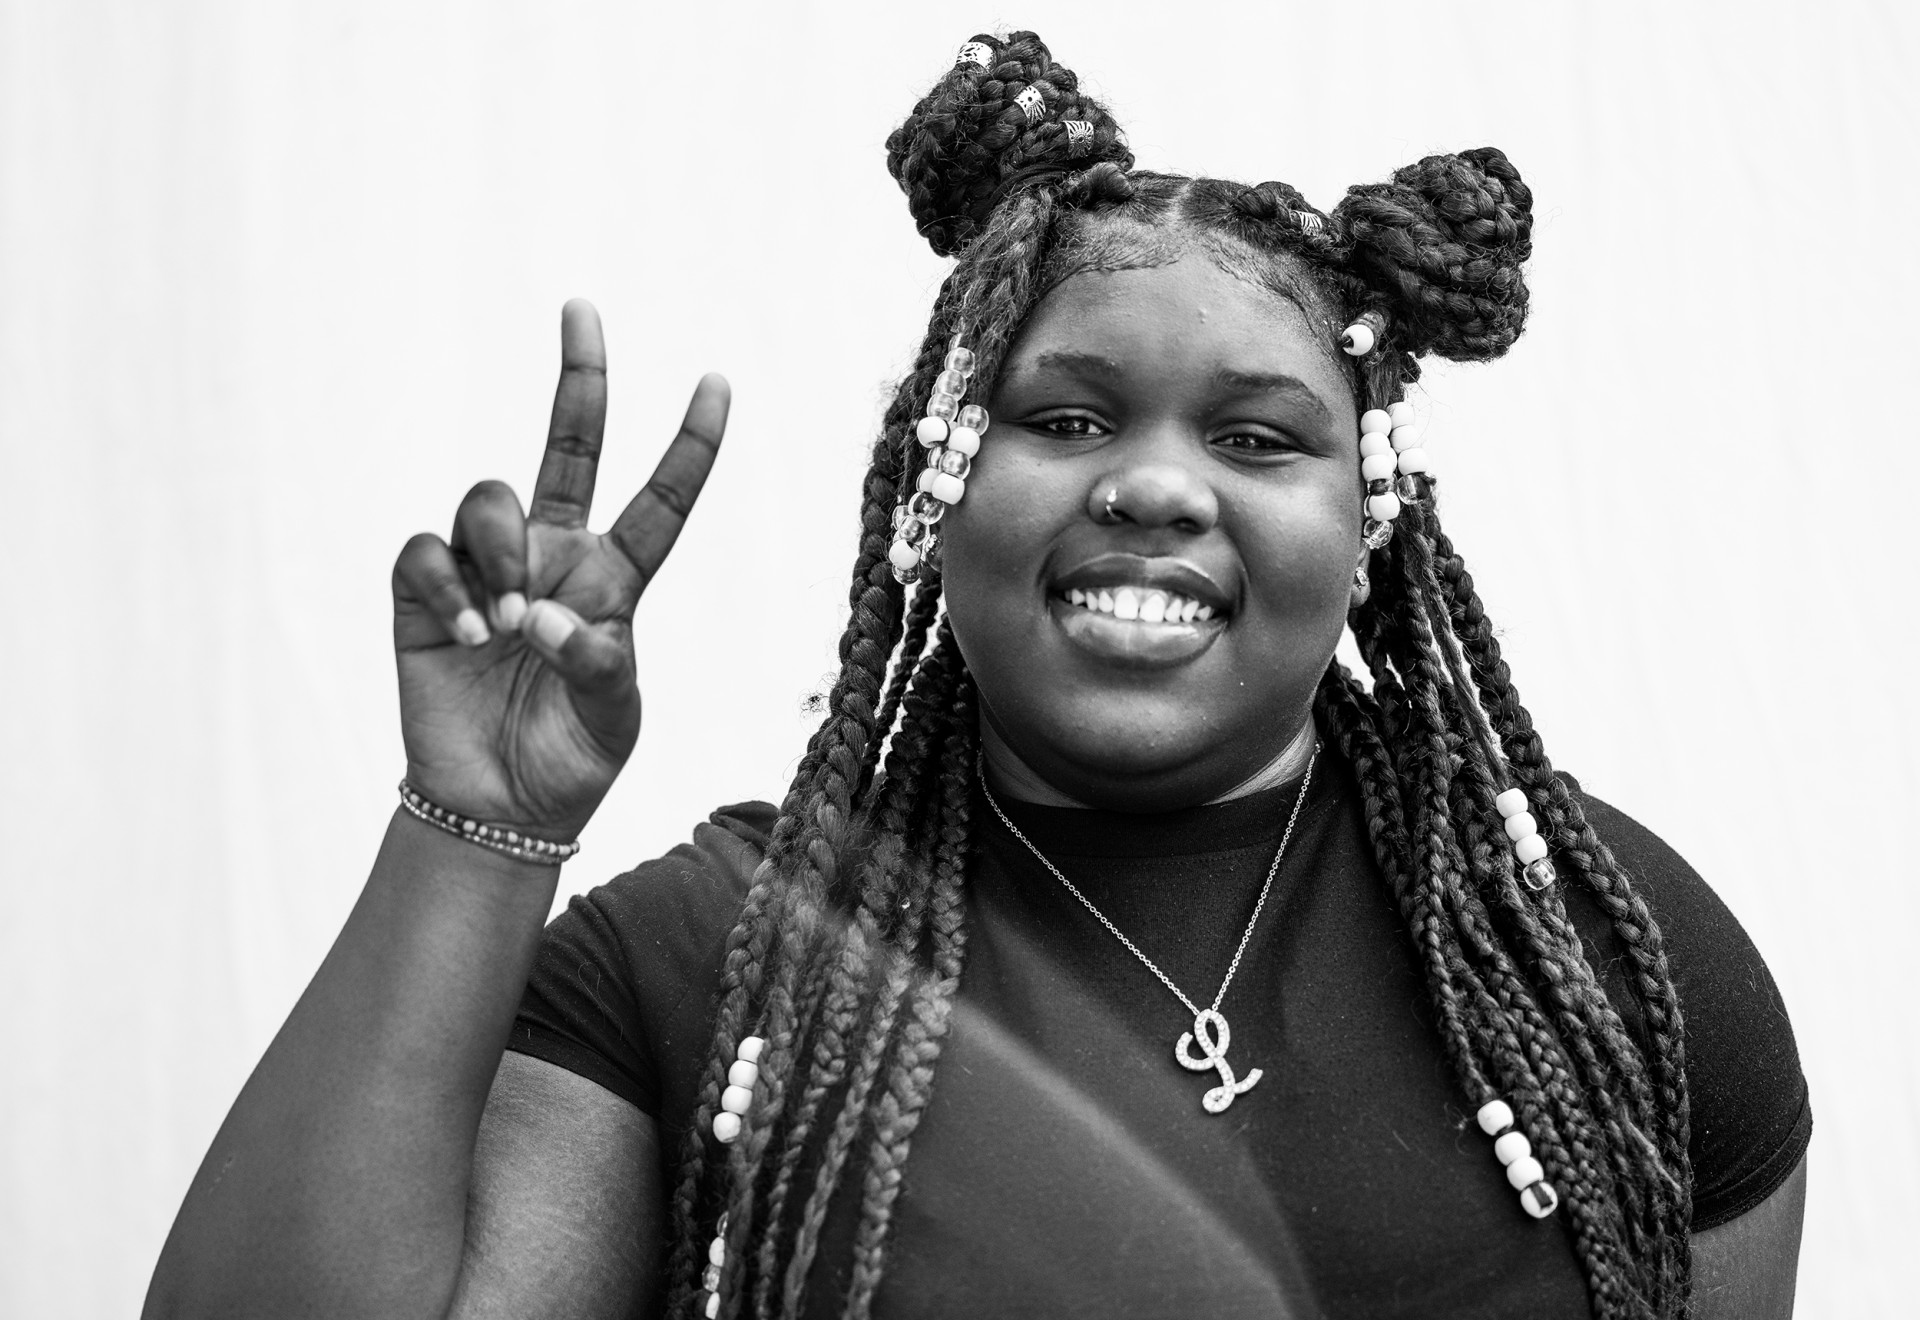 A person with long braids, holding two fingers up as a peace sign and smiling.